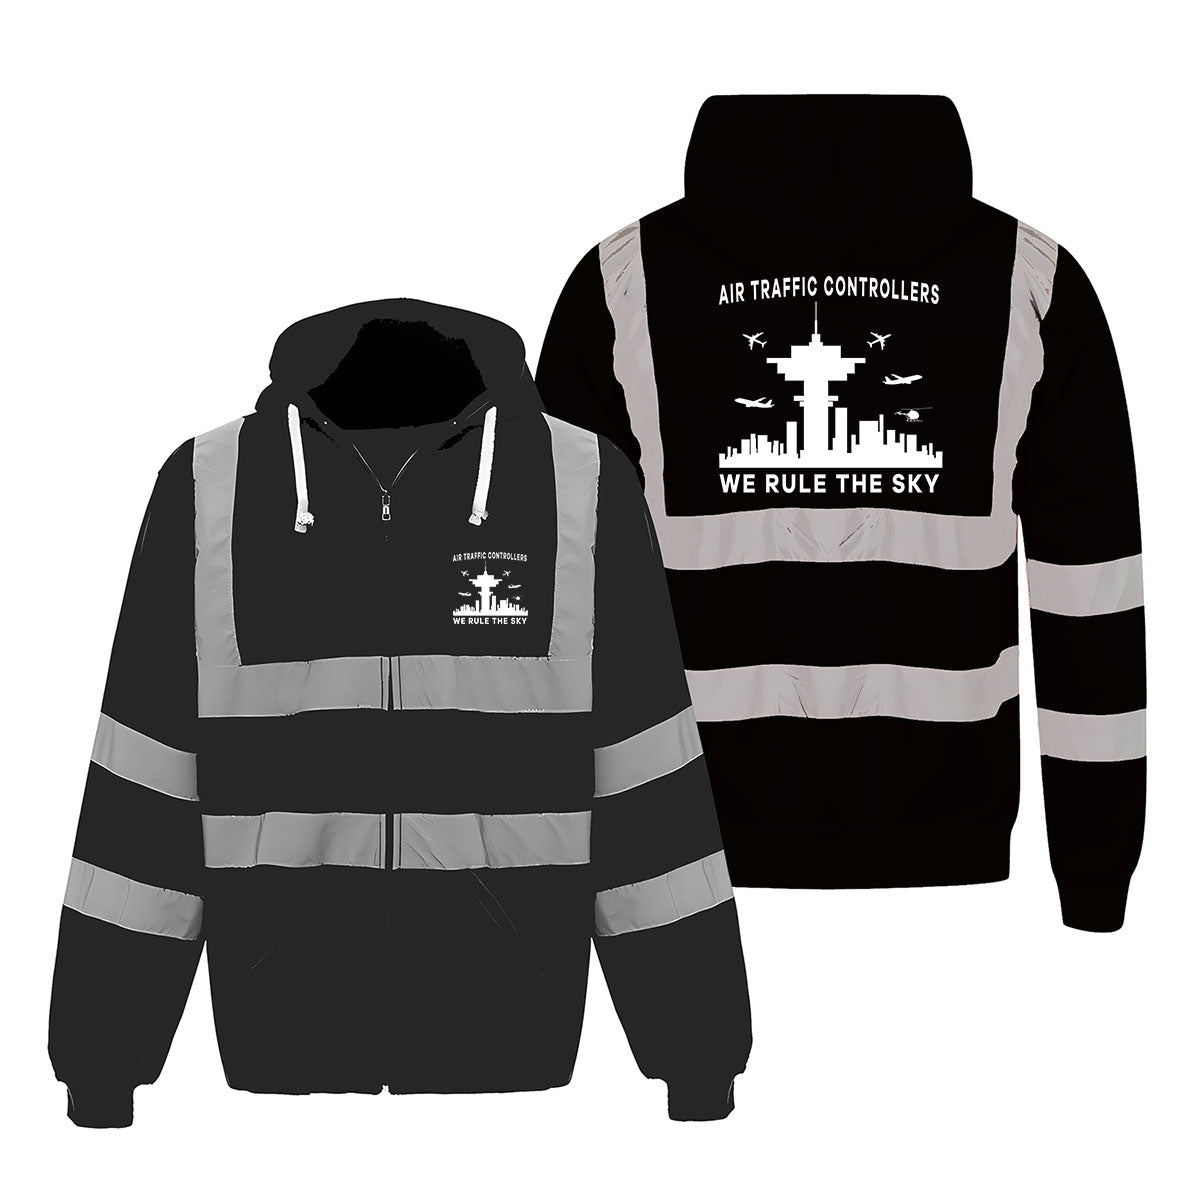 Air Traffic Controllers - We Rule The Sky Designed Reflective Zipped Hoodies